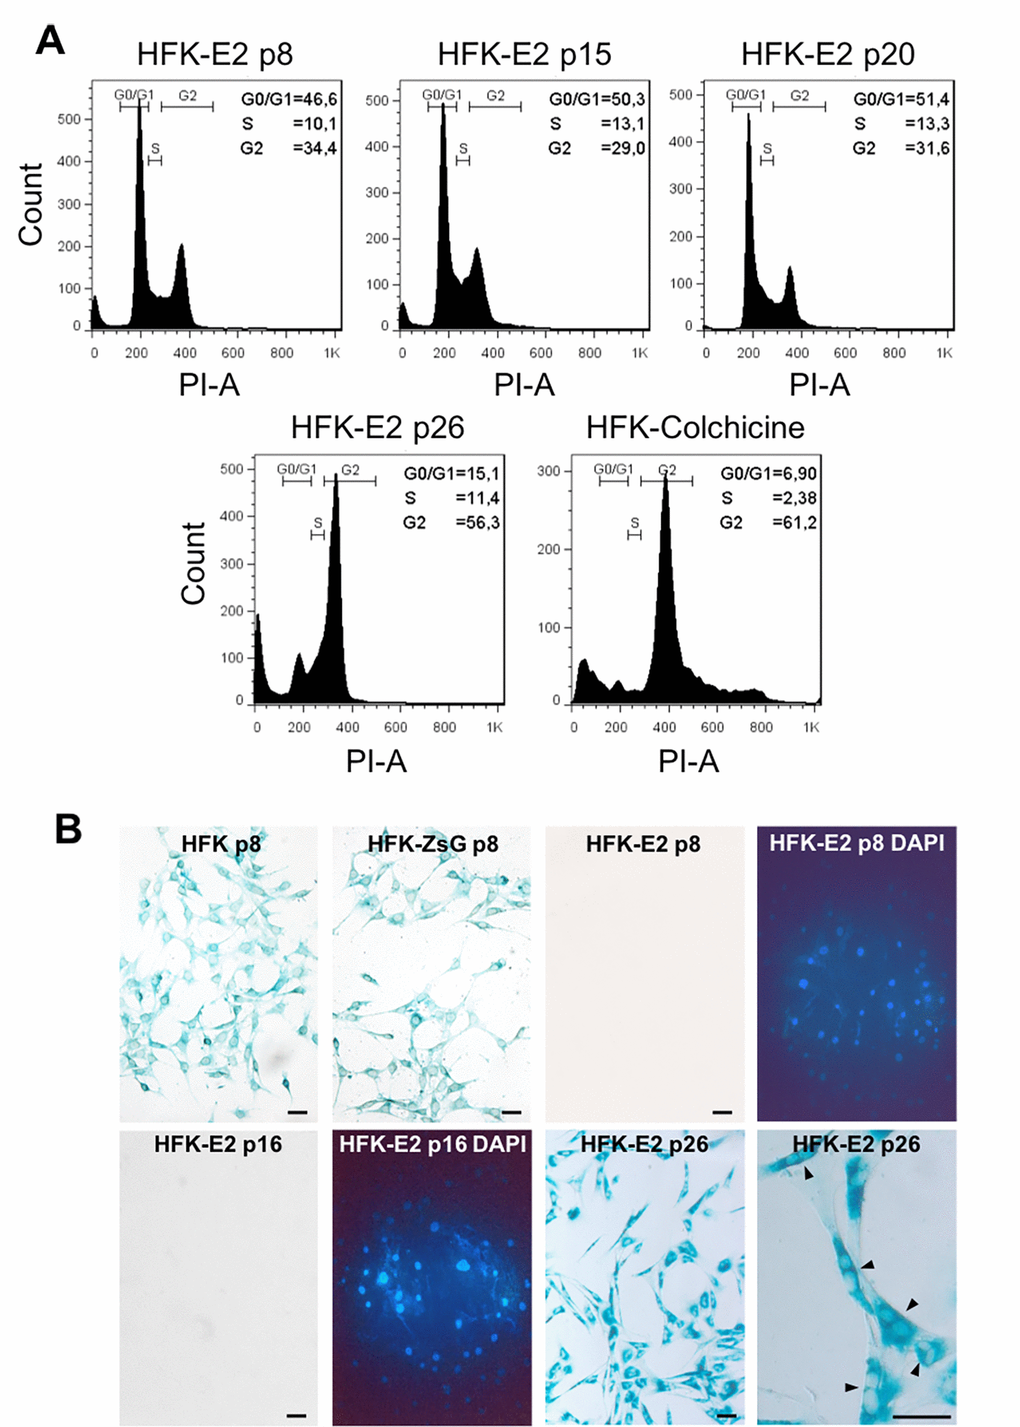 Spontaneous downregulation of E2 in HPV-18 E2-transduced cells induces replicative senescence. (A) Flow cytometric analysis of HFK-E2 cells at passages 8, 15 and 20 exhibited normal cell cycles with similar proportion of cells at G0/G1, S and G2/M phases. At p26, cells were arrested at G2/M, similar to HFK treated with 100 nM colchicine as positive control. (B) As shown before, HFK and HFK-ZsG at passage 8 were positive to SA-β-galactosidase activity, whereas HFK-E2 cells at p8 and p16 were negative to this senescence marker (DAPI stain is shown for both fields). At p26, HFK-E2 cells became positive for SA-β-galactosidase staining and a higher magnification shows many binucleated cells (arrowheads). Bars = 50 μm.